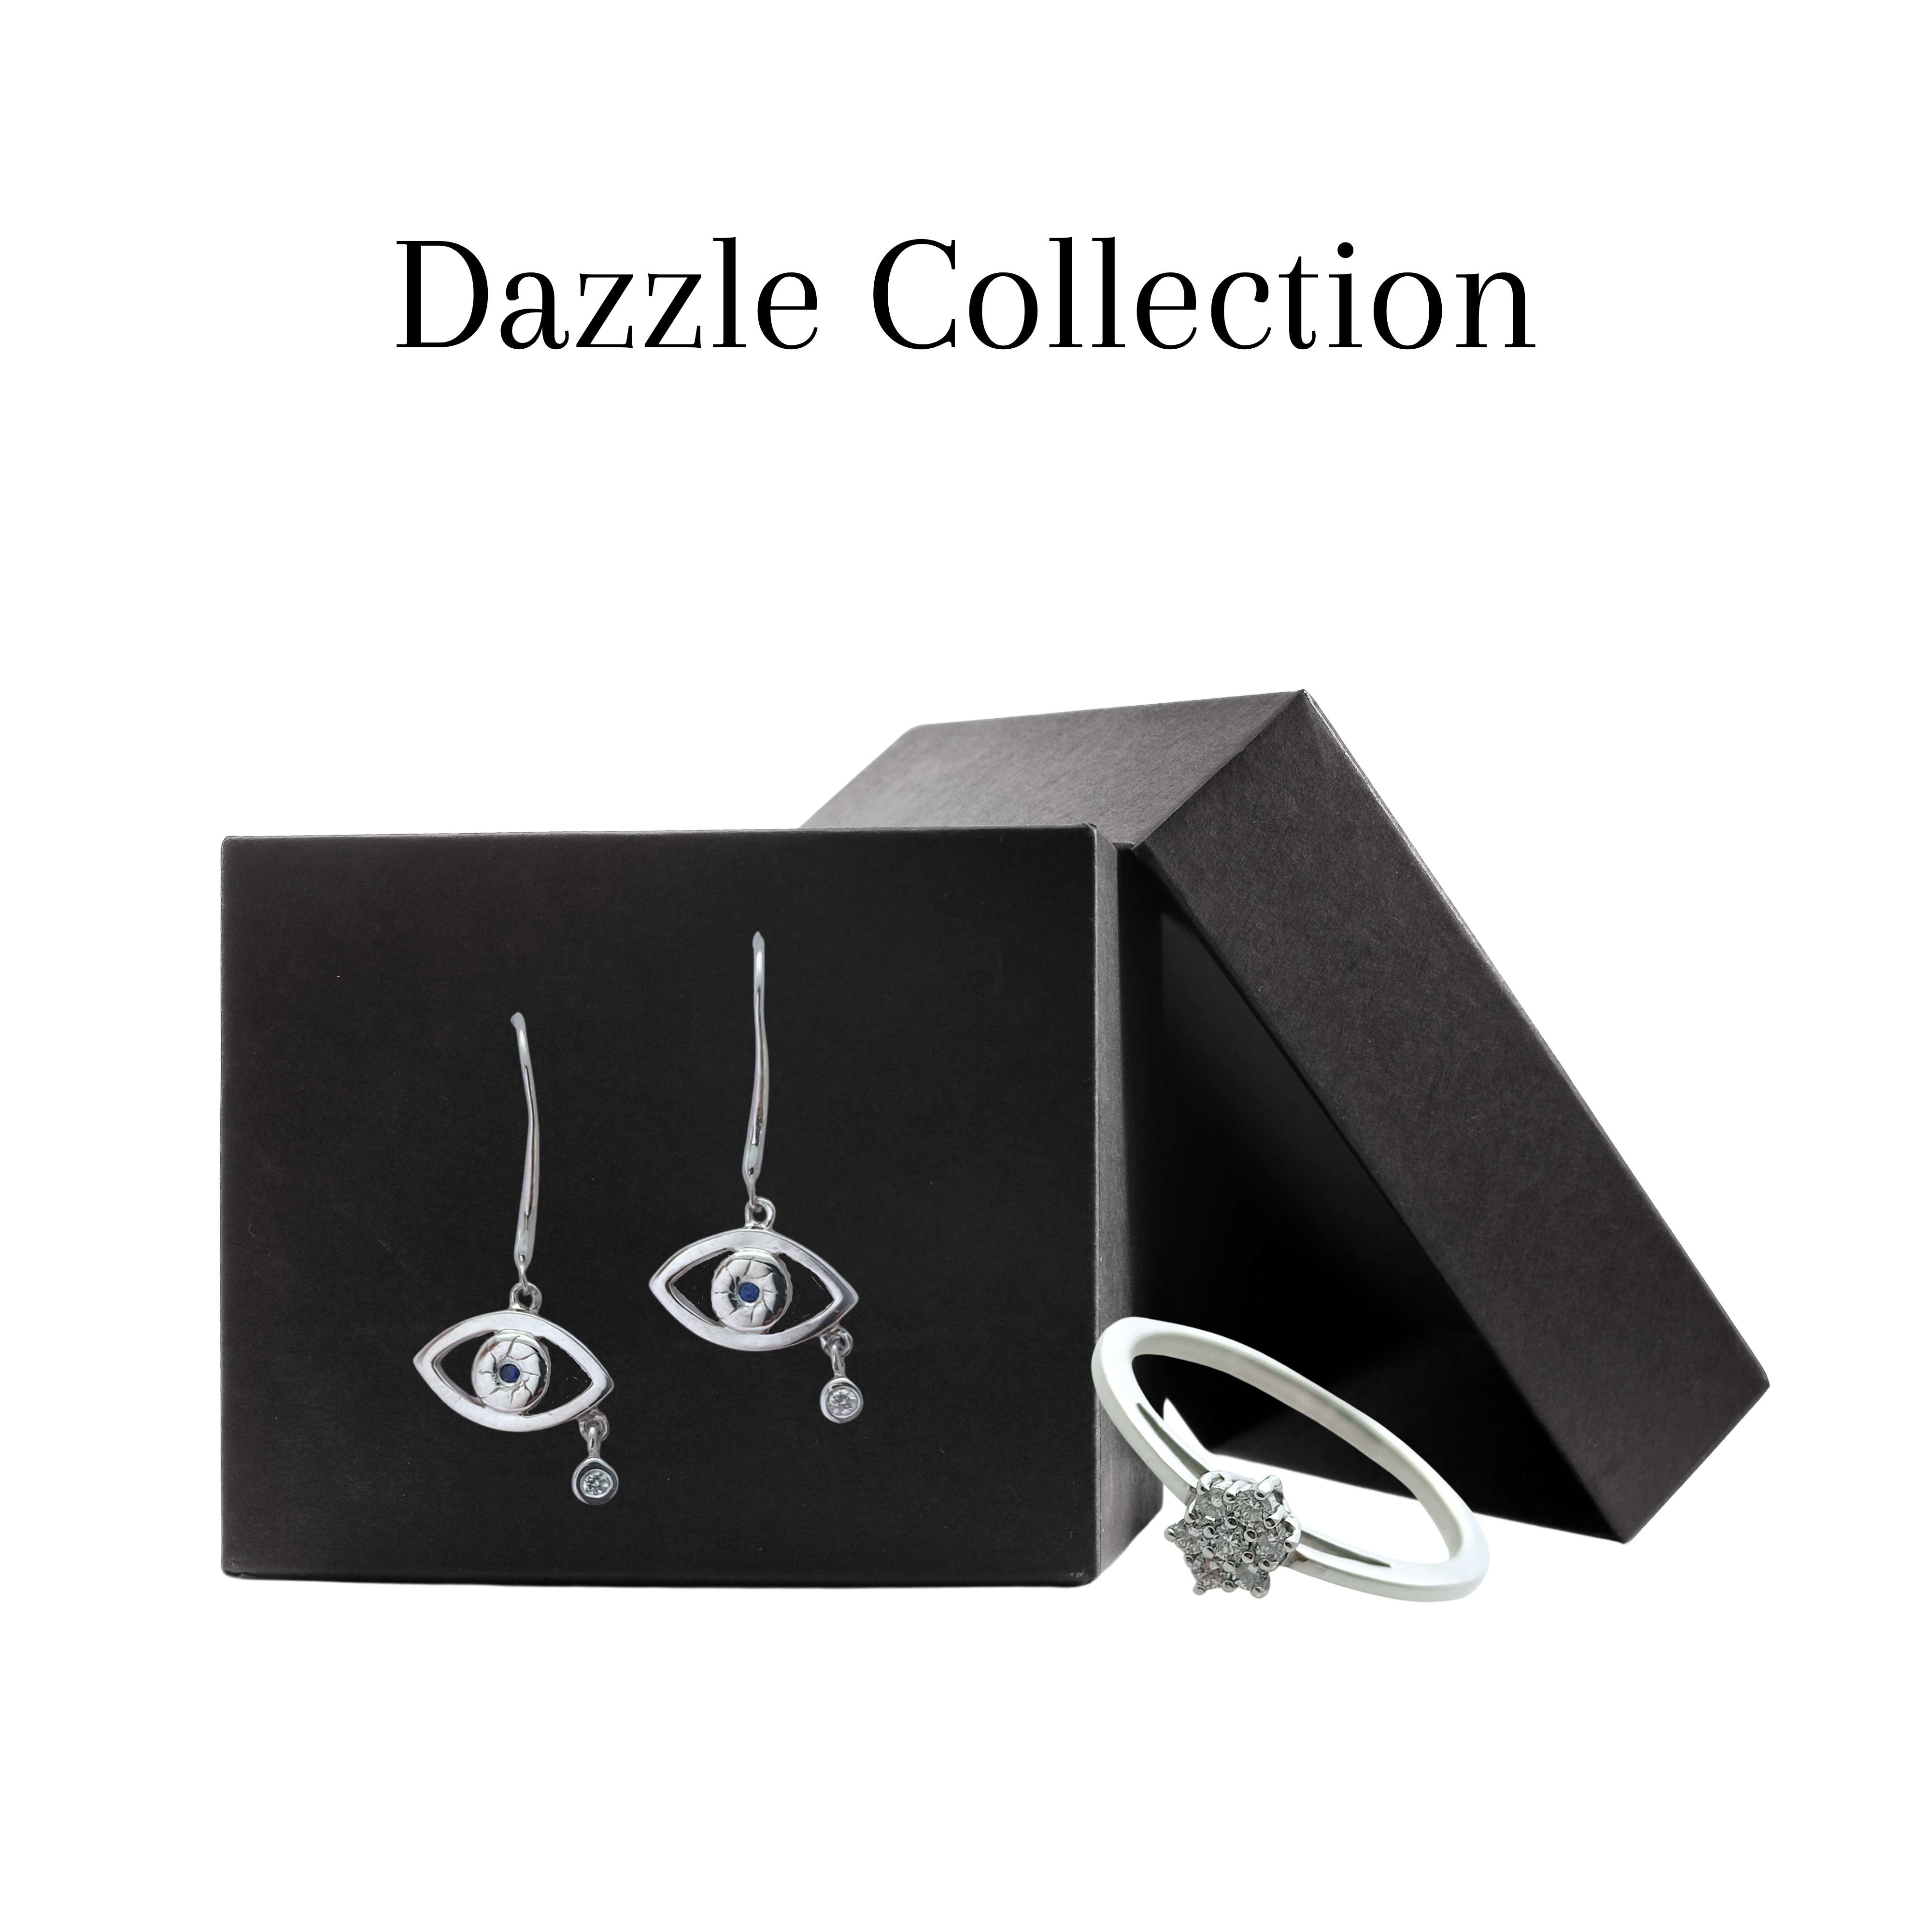 Dazzle Collection category image